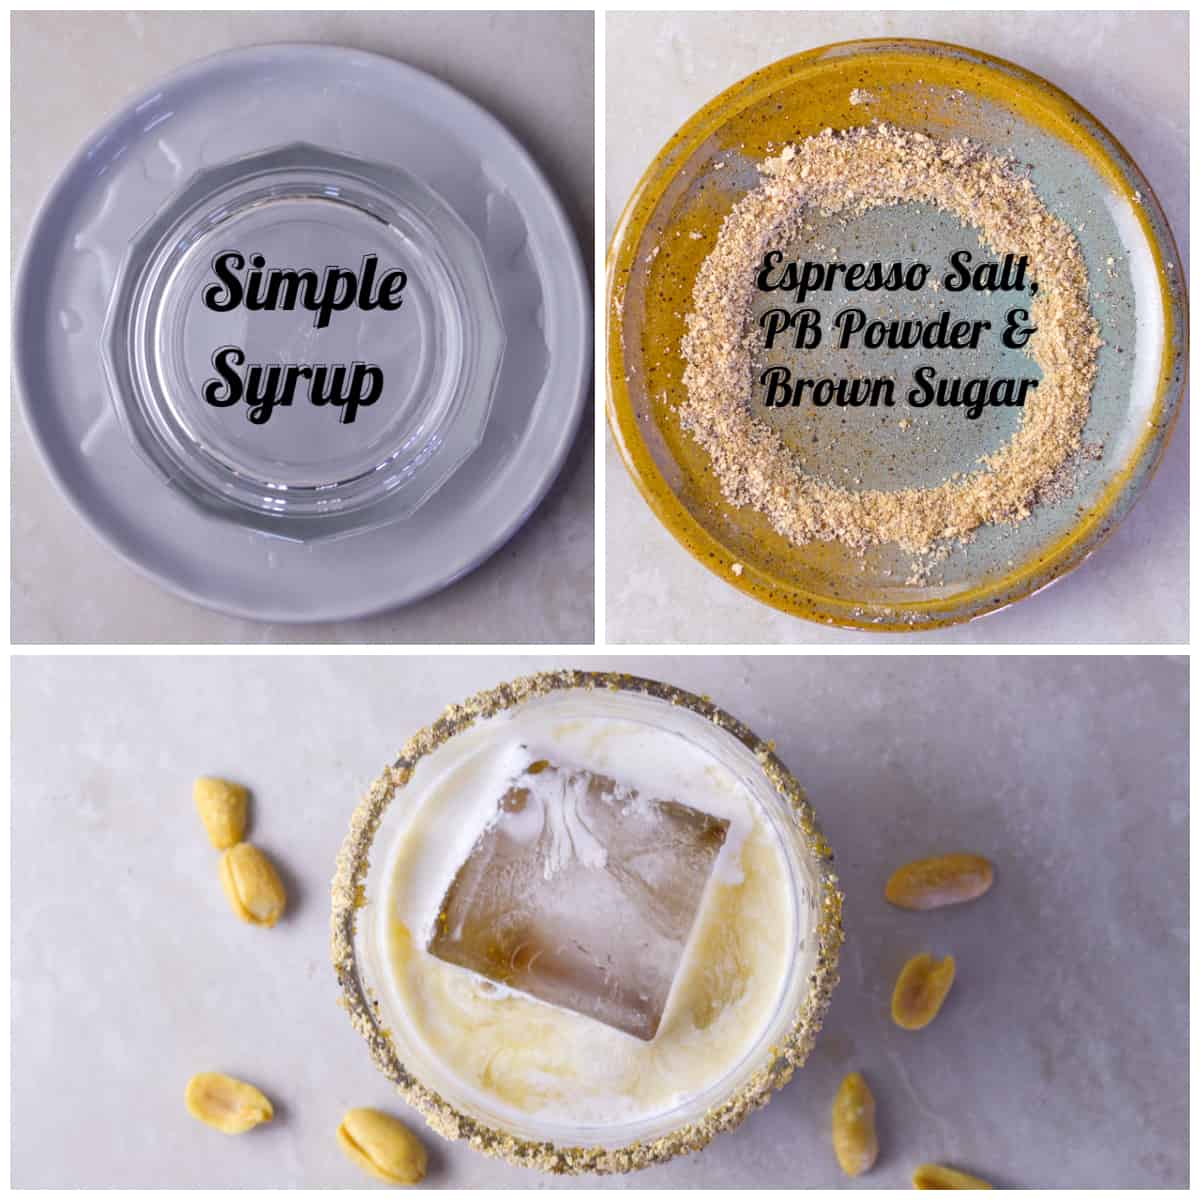 Salted Rim Option shown with glass upside down in simple Syrup and a combo of espresso salt, peanut butter powder and brown sugar to the right and a salted rim on the bottom of the collage